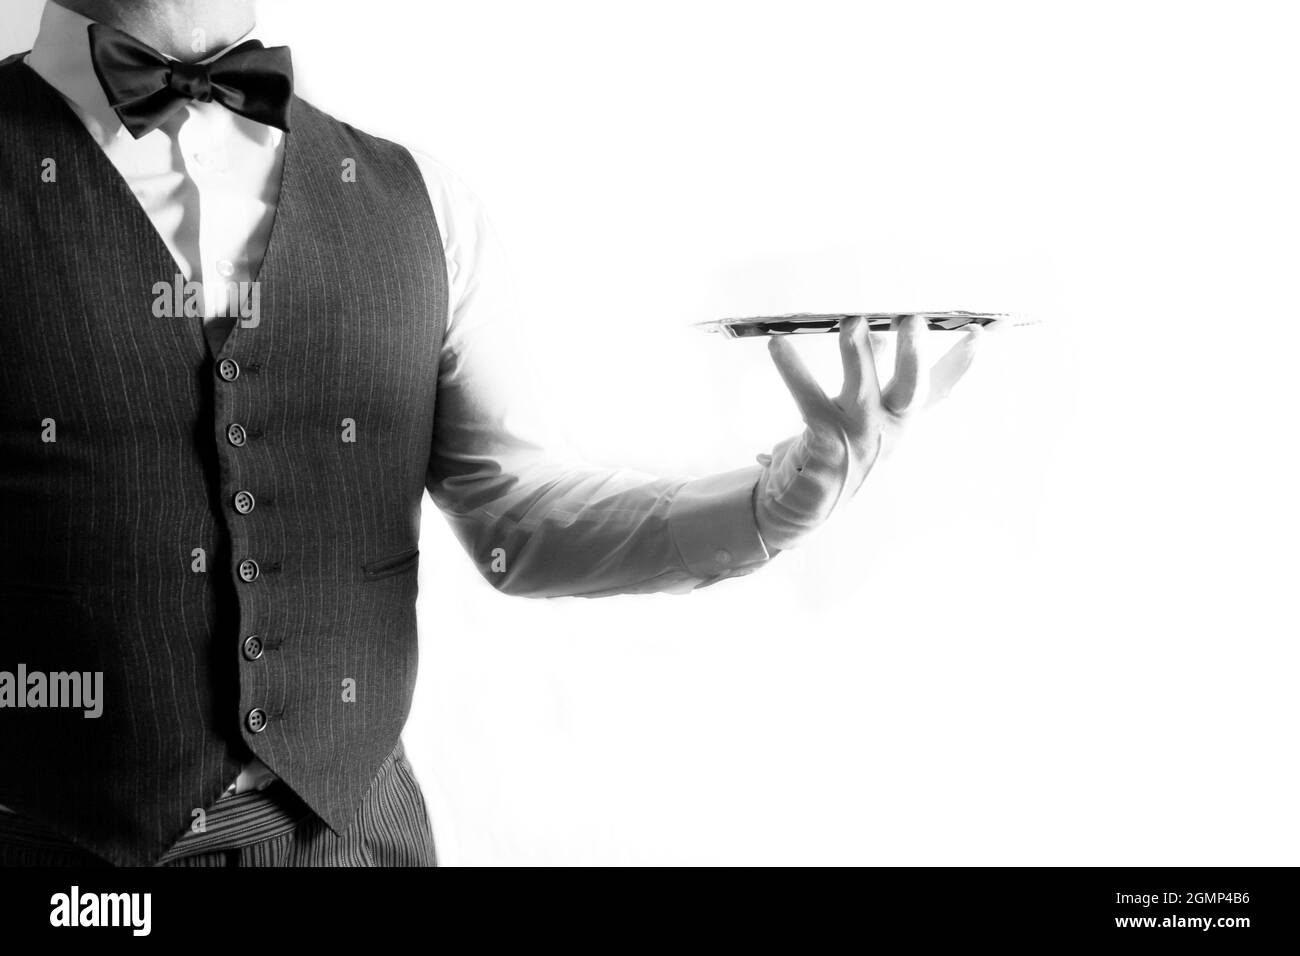 Portrait of Butler or Waiter in White Gloves Holding Serving Tray on White Background. Copy Space for Service Industry and Professional Hospitality. Stock Photo